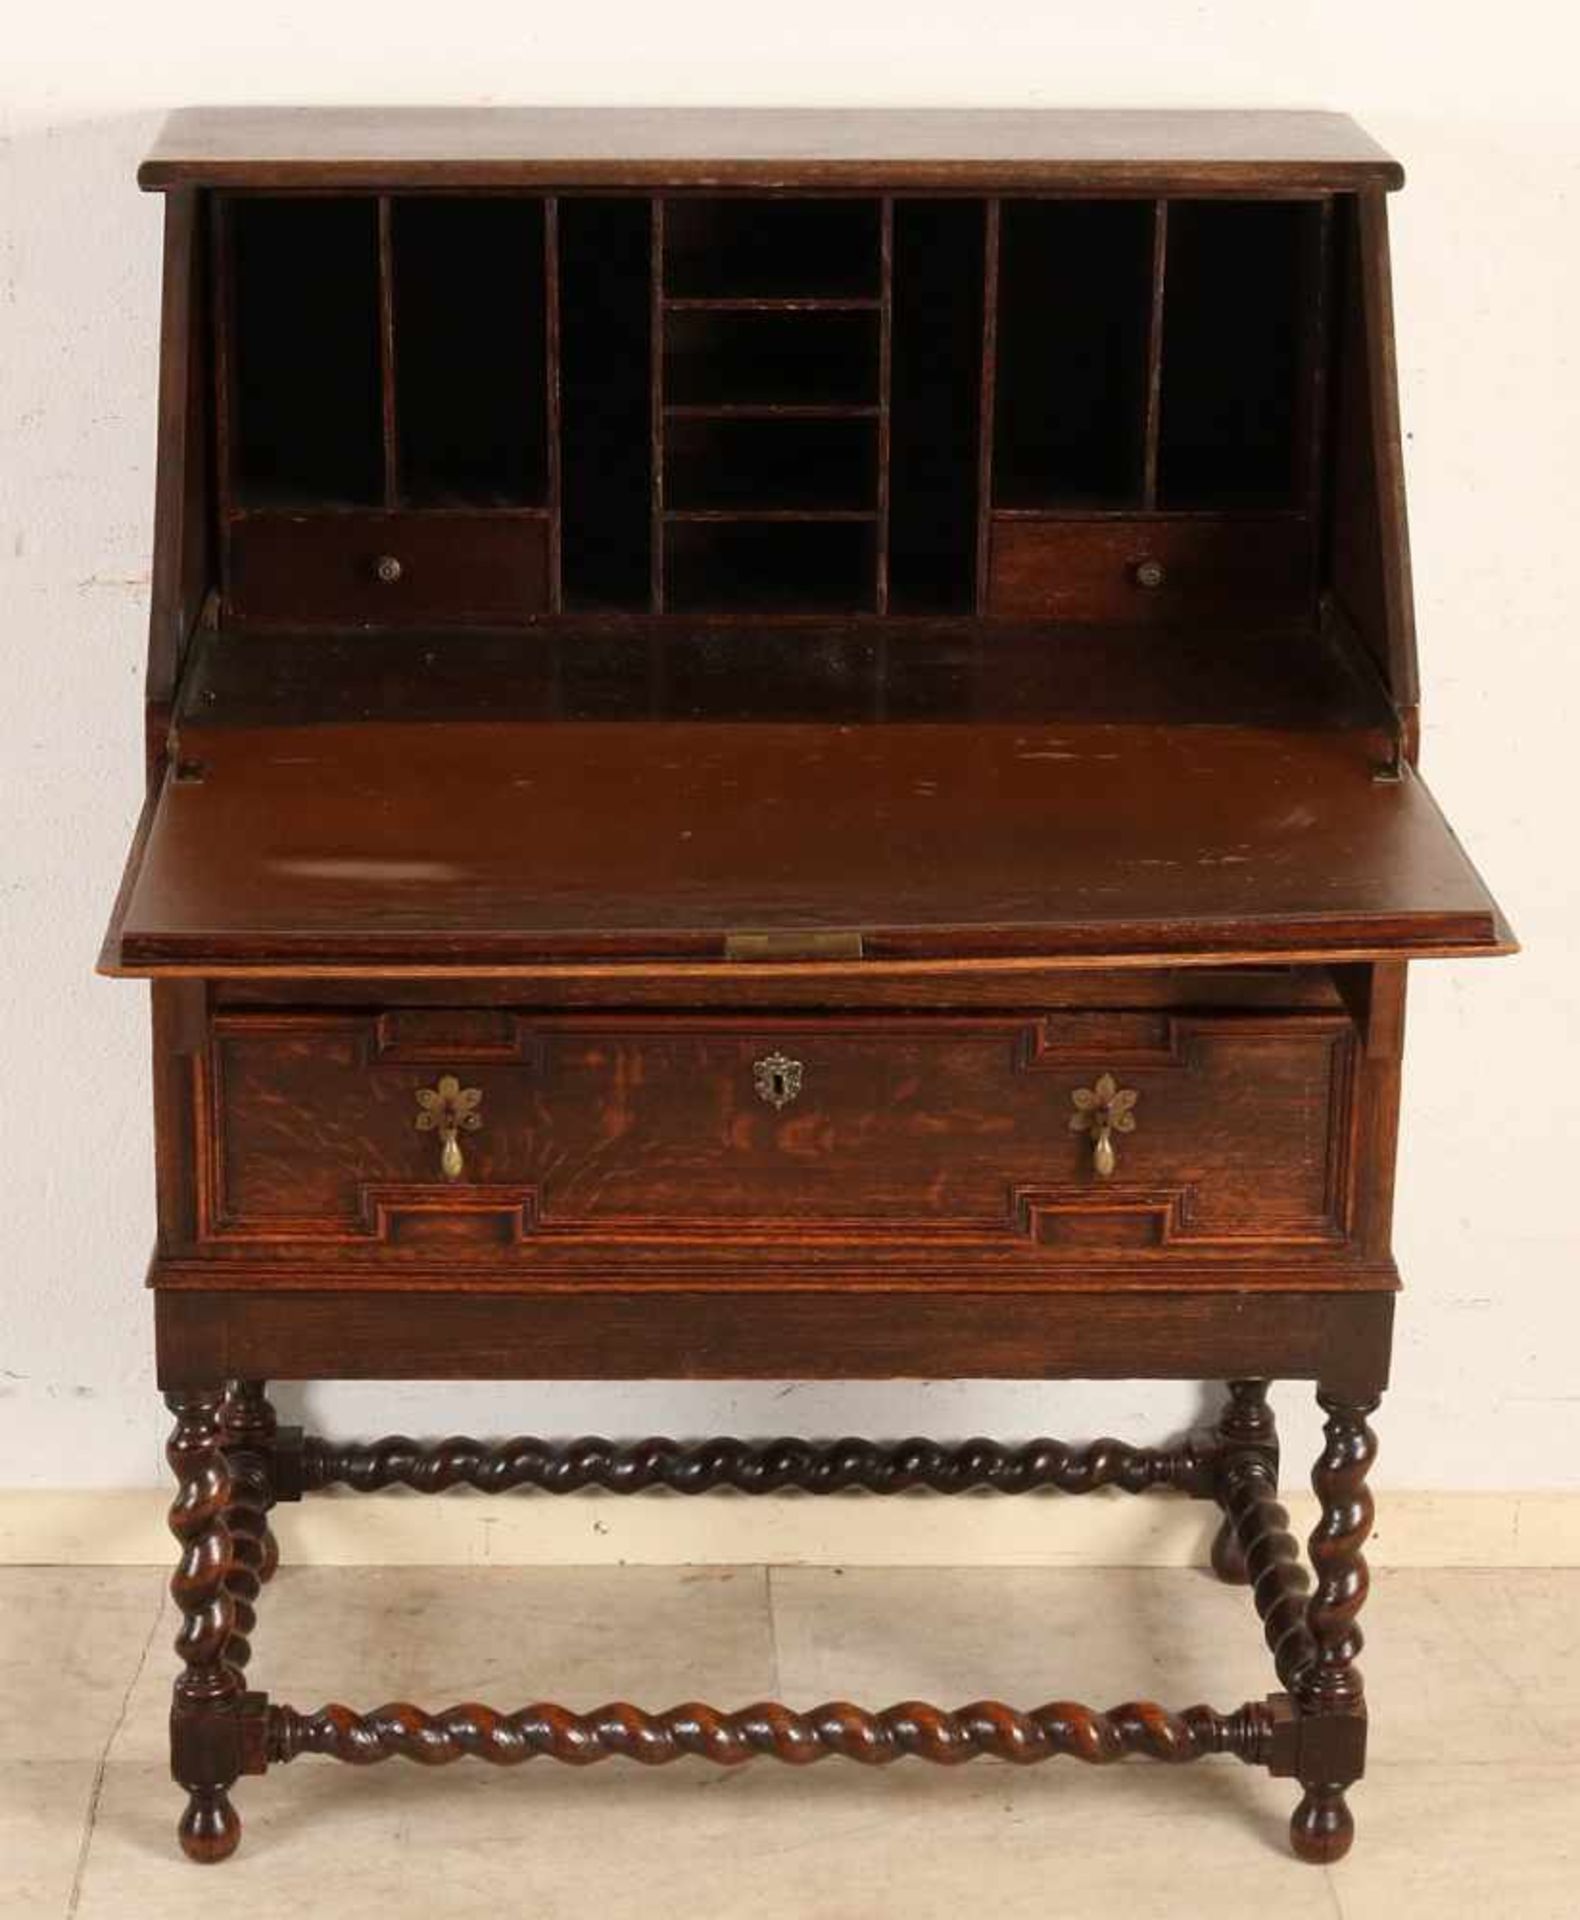 Antique English oak desk with original fittings and twisted legs. Approximately 1920. Size: 106 x 80